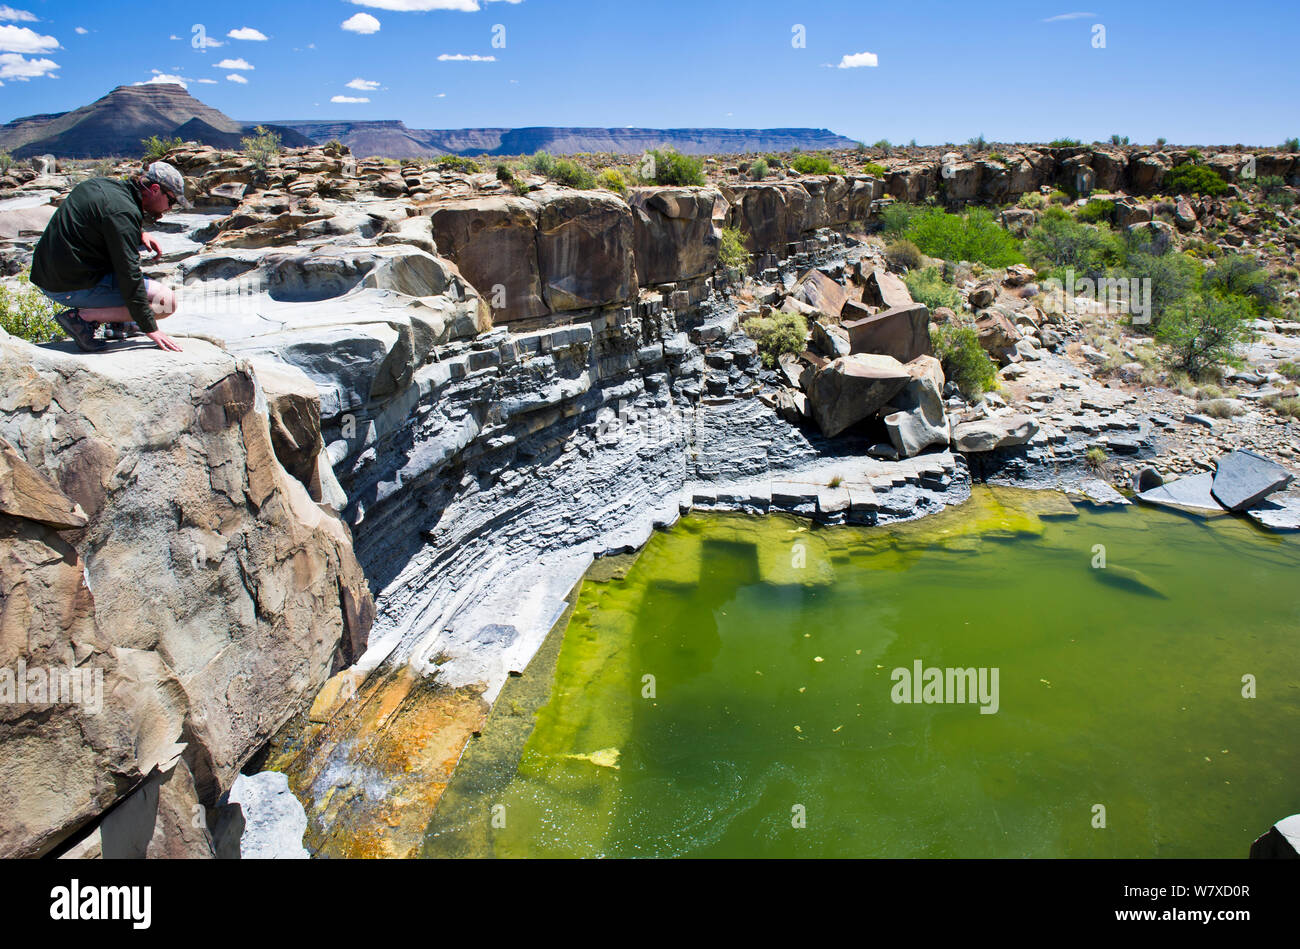 A field assistant of ecologist Bruce Paxton looking down into a freshwater pool to determine the presence of fish. Tankwa Karoo, Western Cape, South Africa. Part of the IUCN SOS Cape Critical Rivers Conservation Project, October 2013. Stock Photo